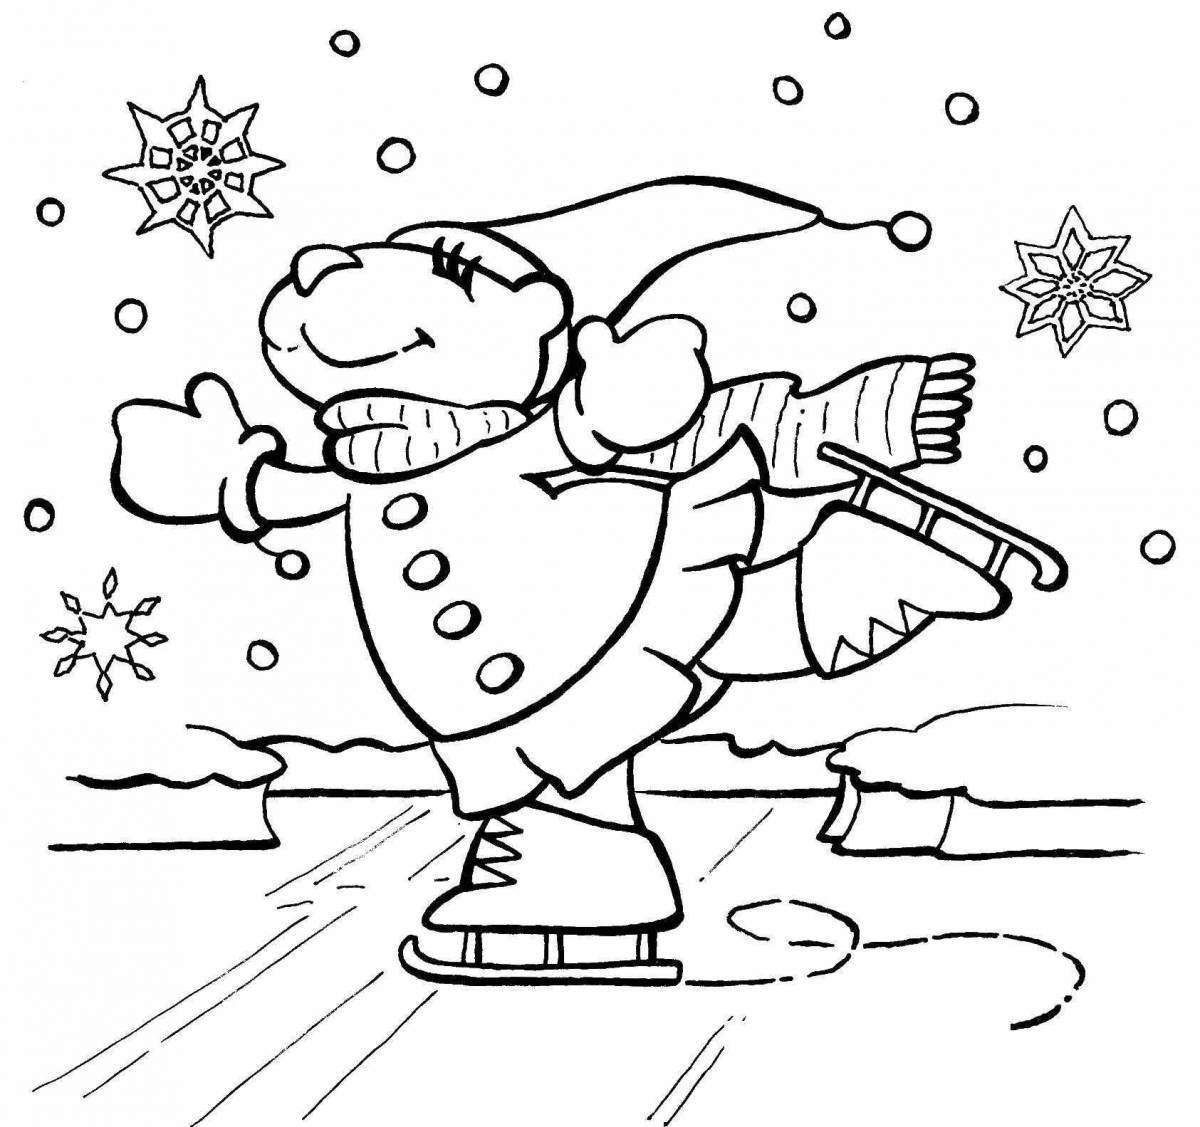 Vivacious skates coloring book for 5-6 year olds